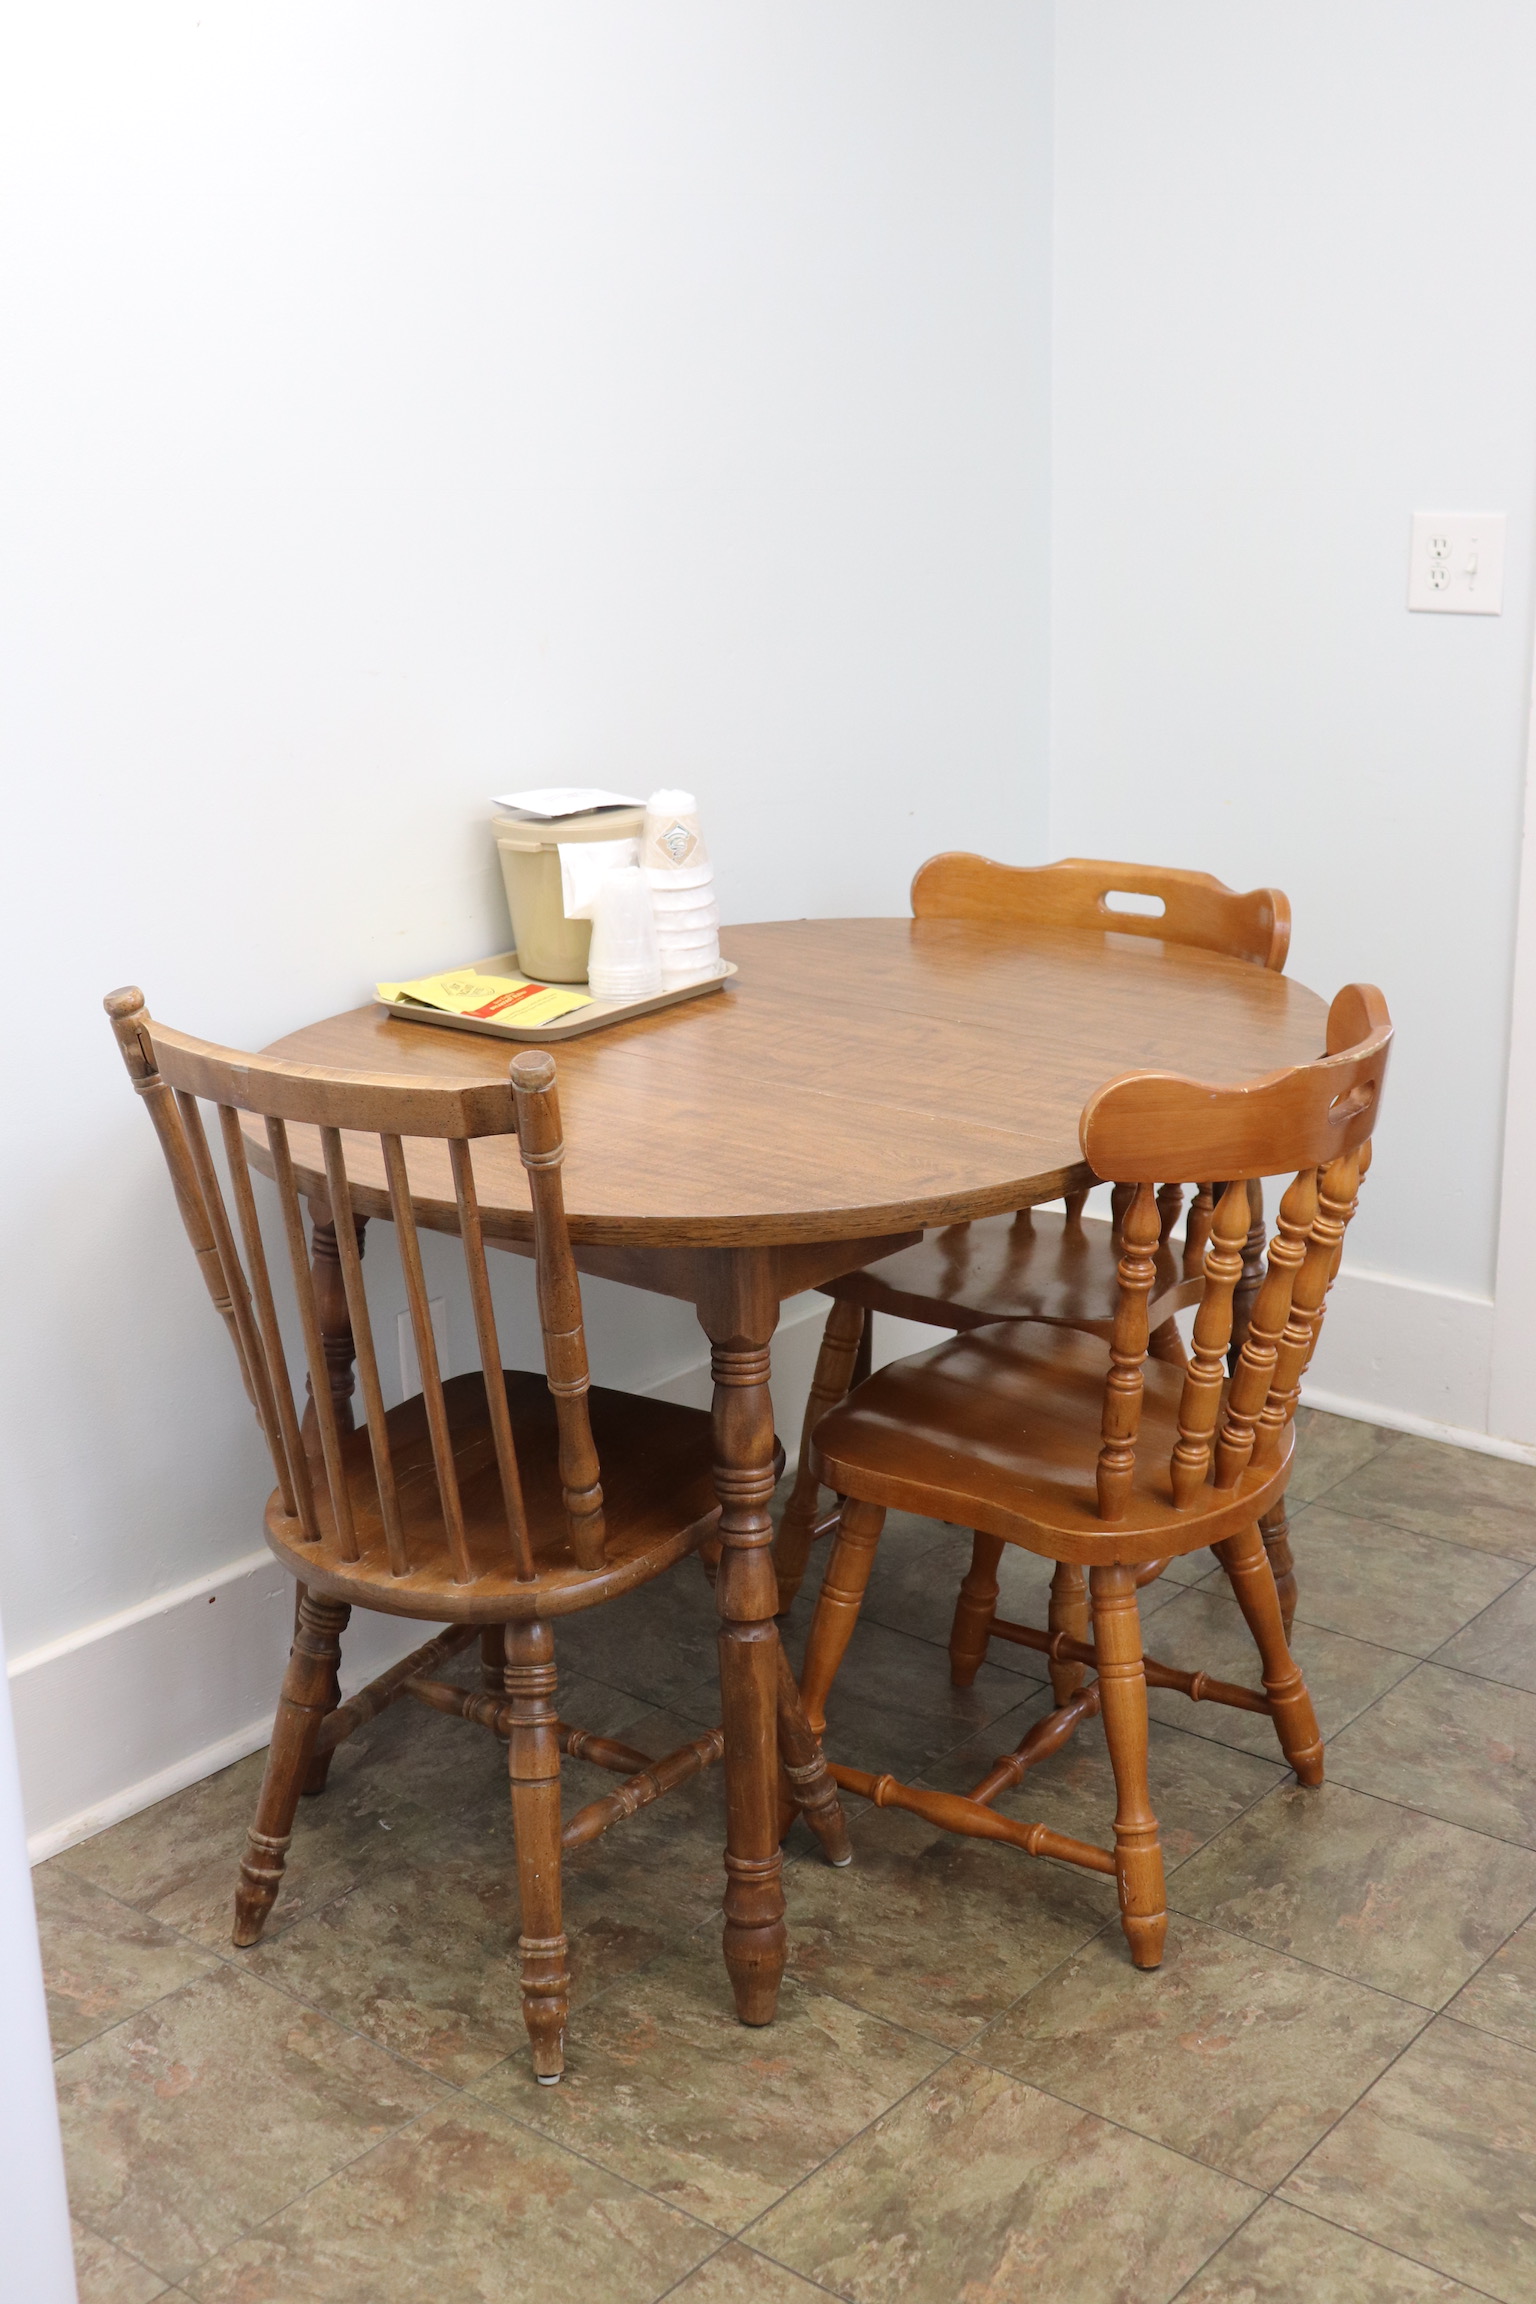 Wooden dining table with 3 chairs